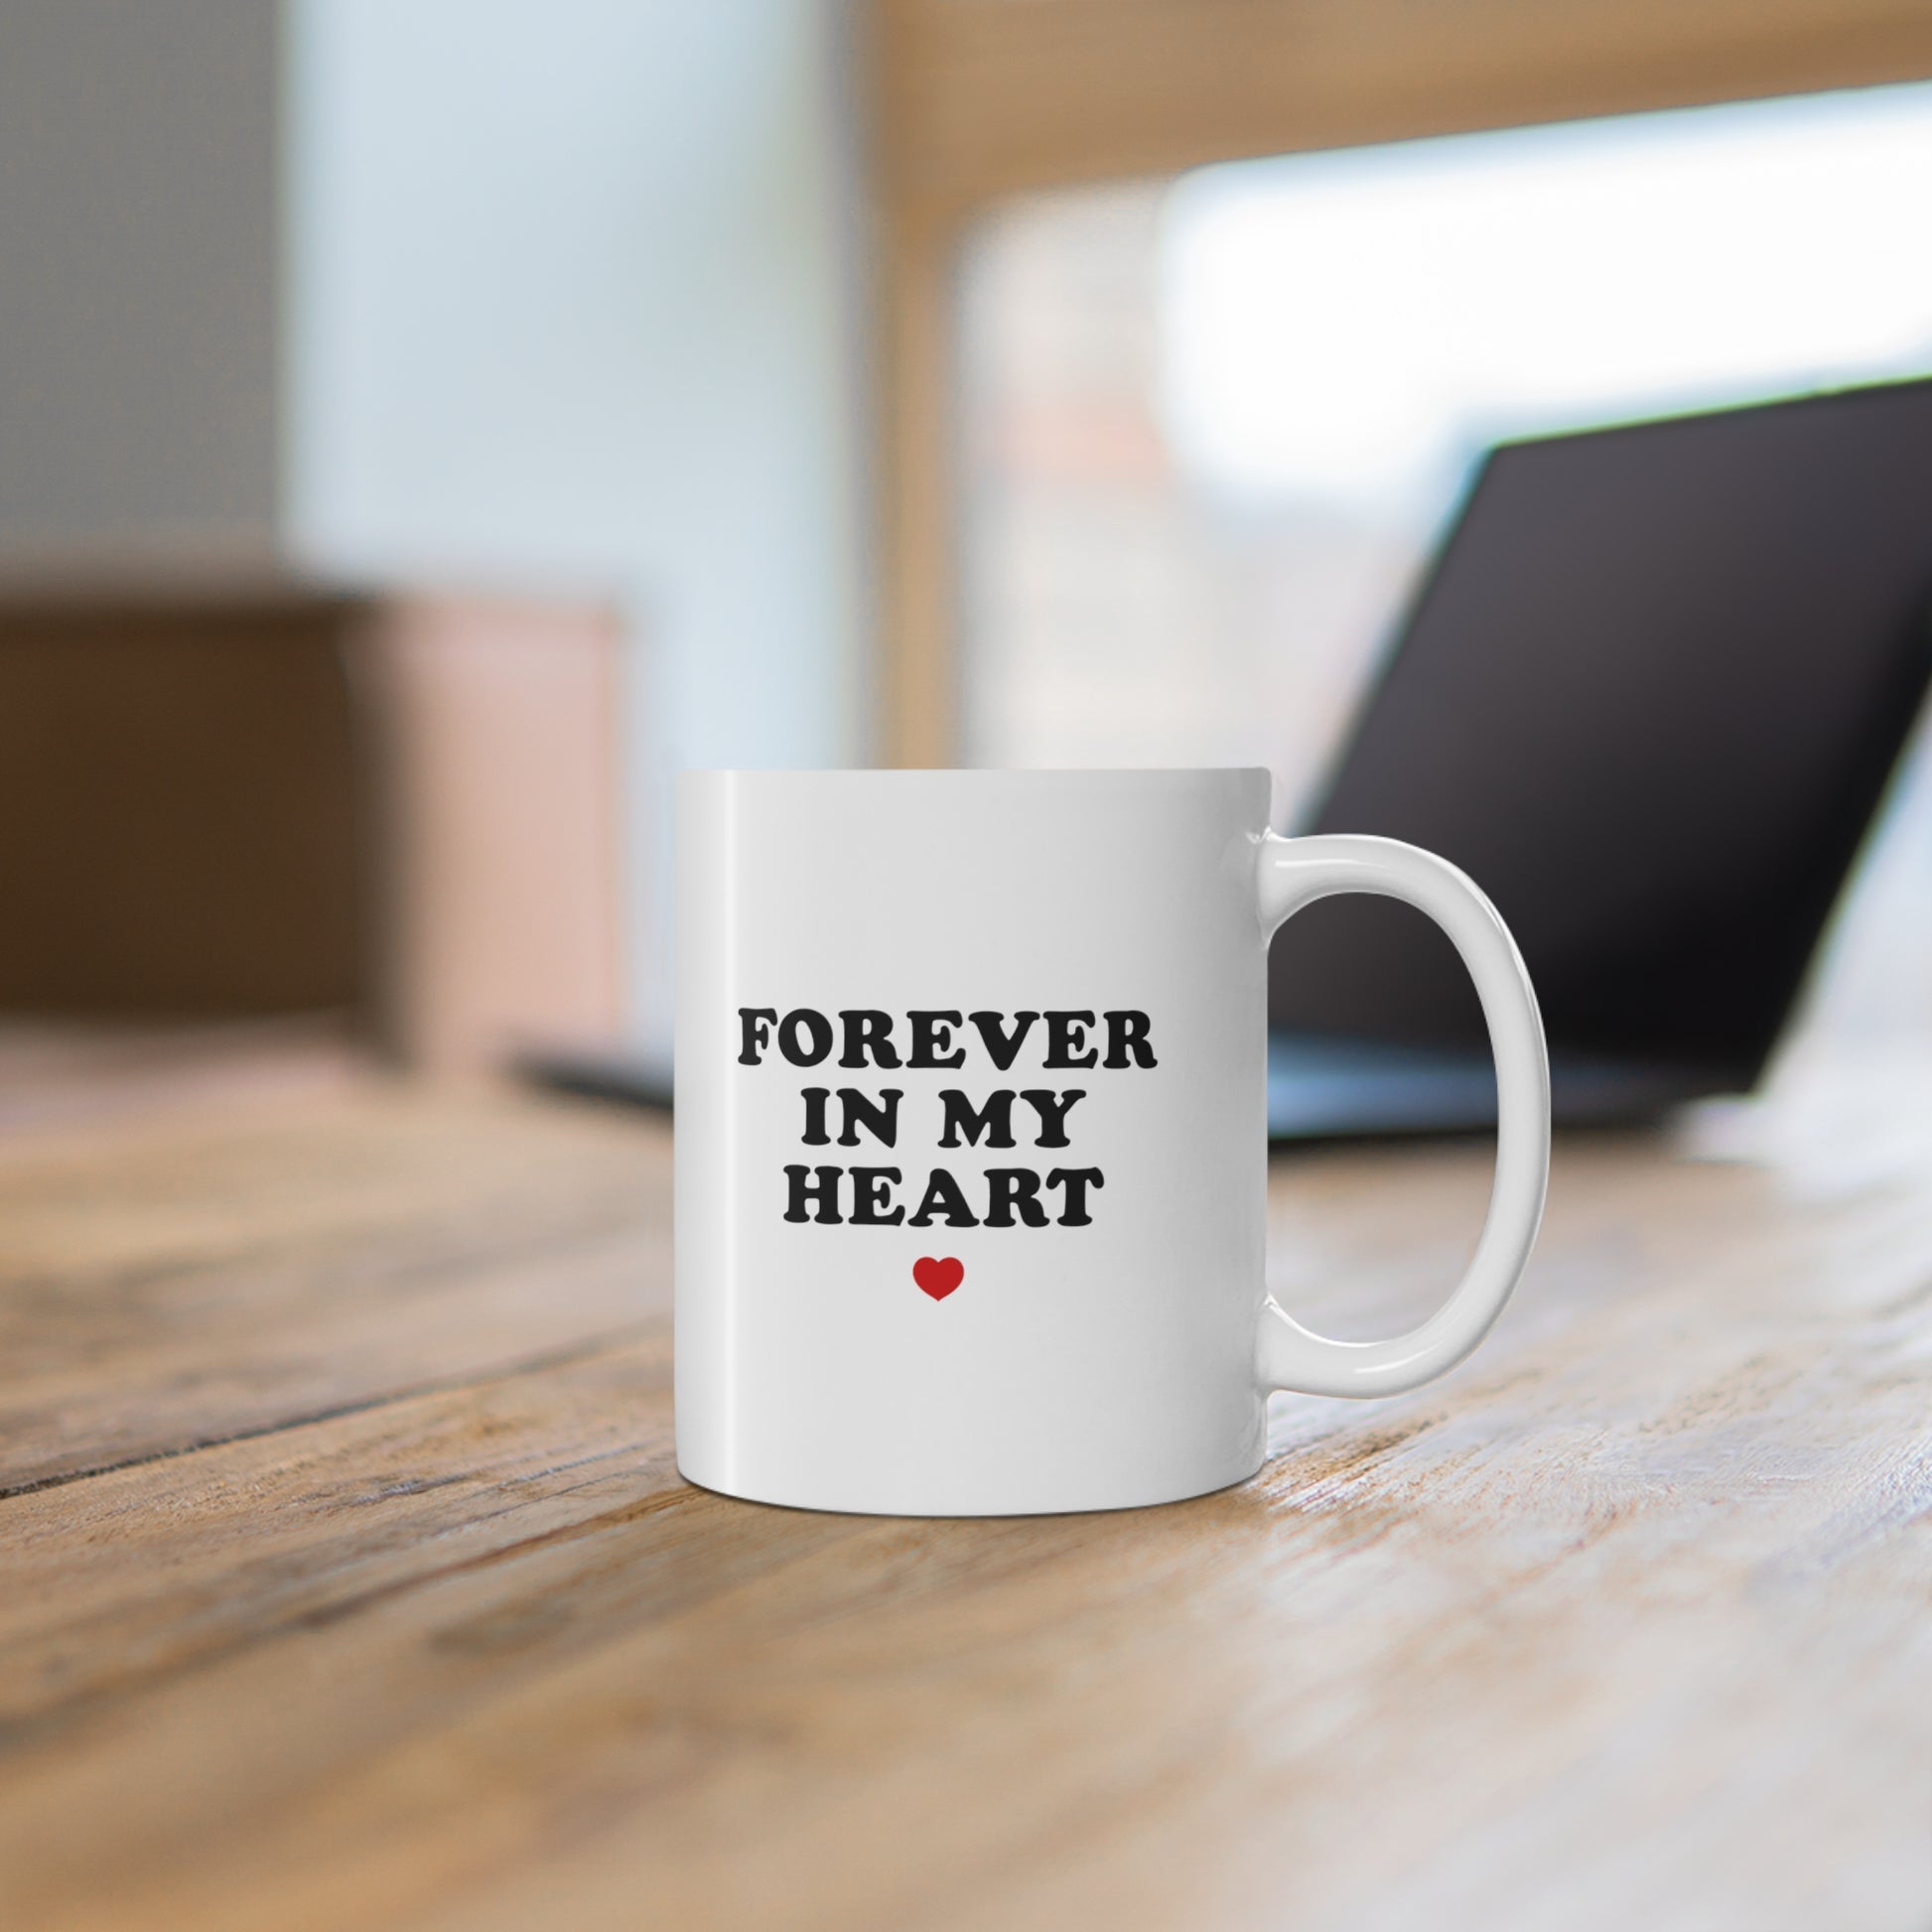 withe ceramic mug with quote Forever In My Heart